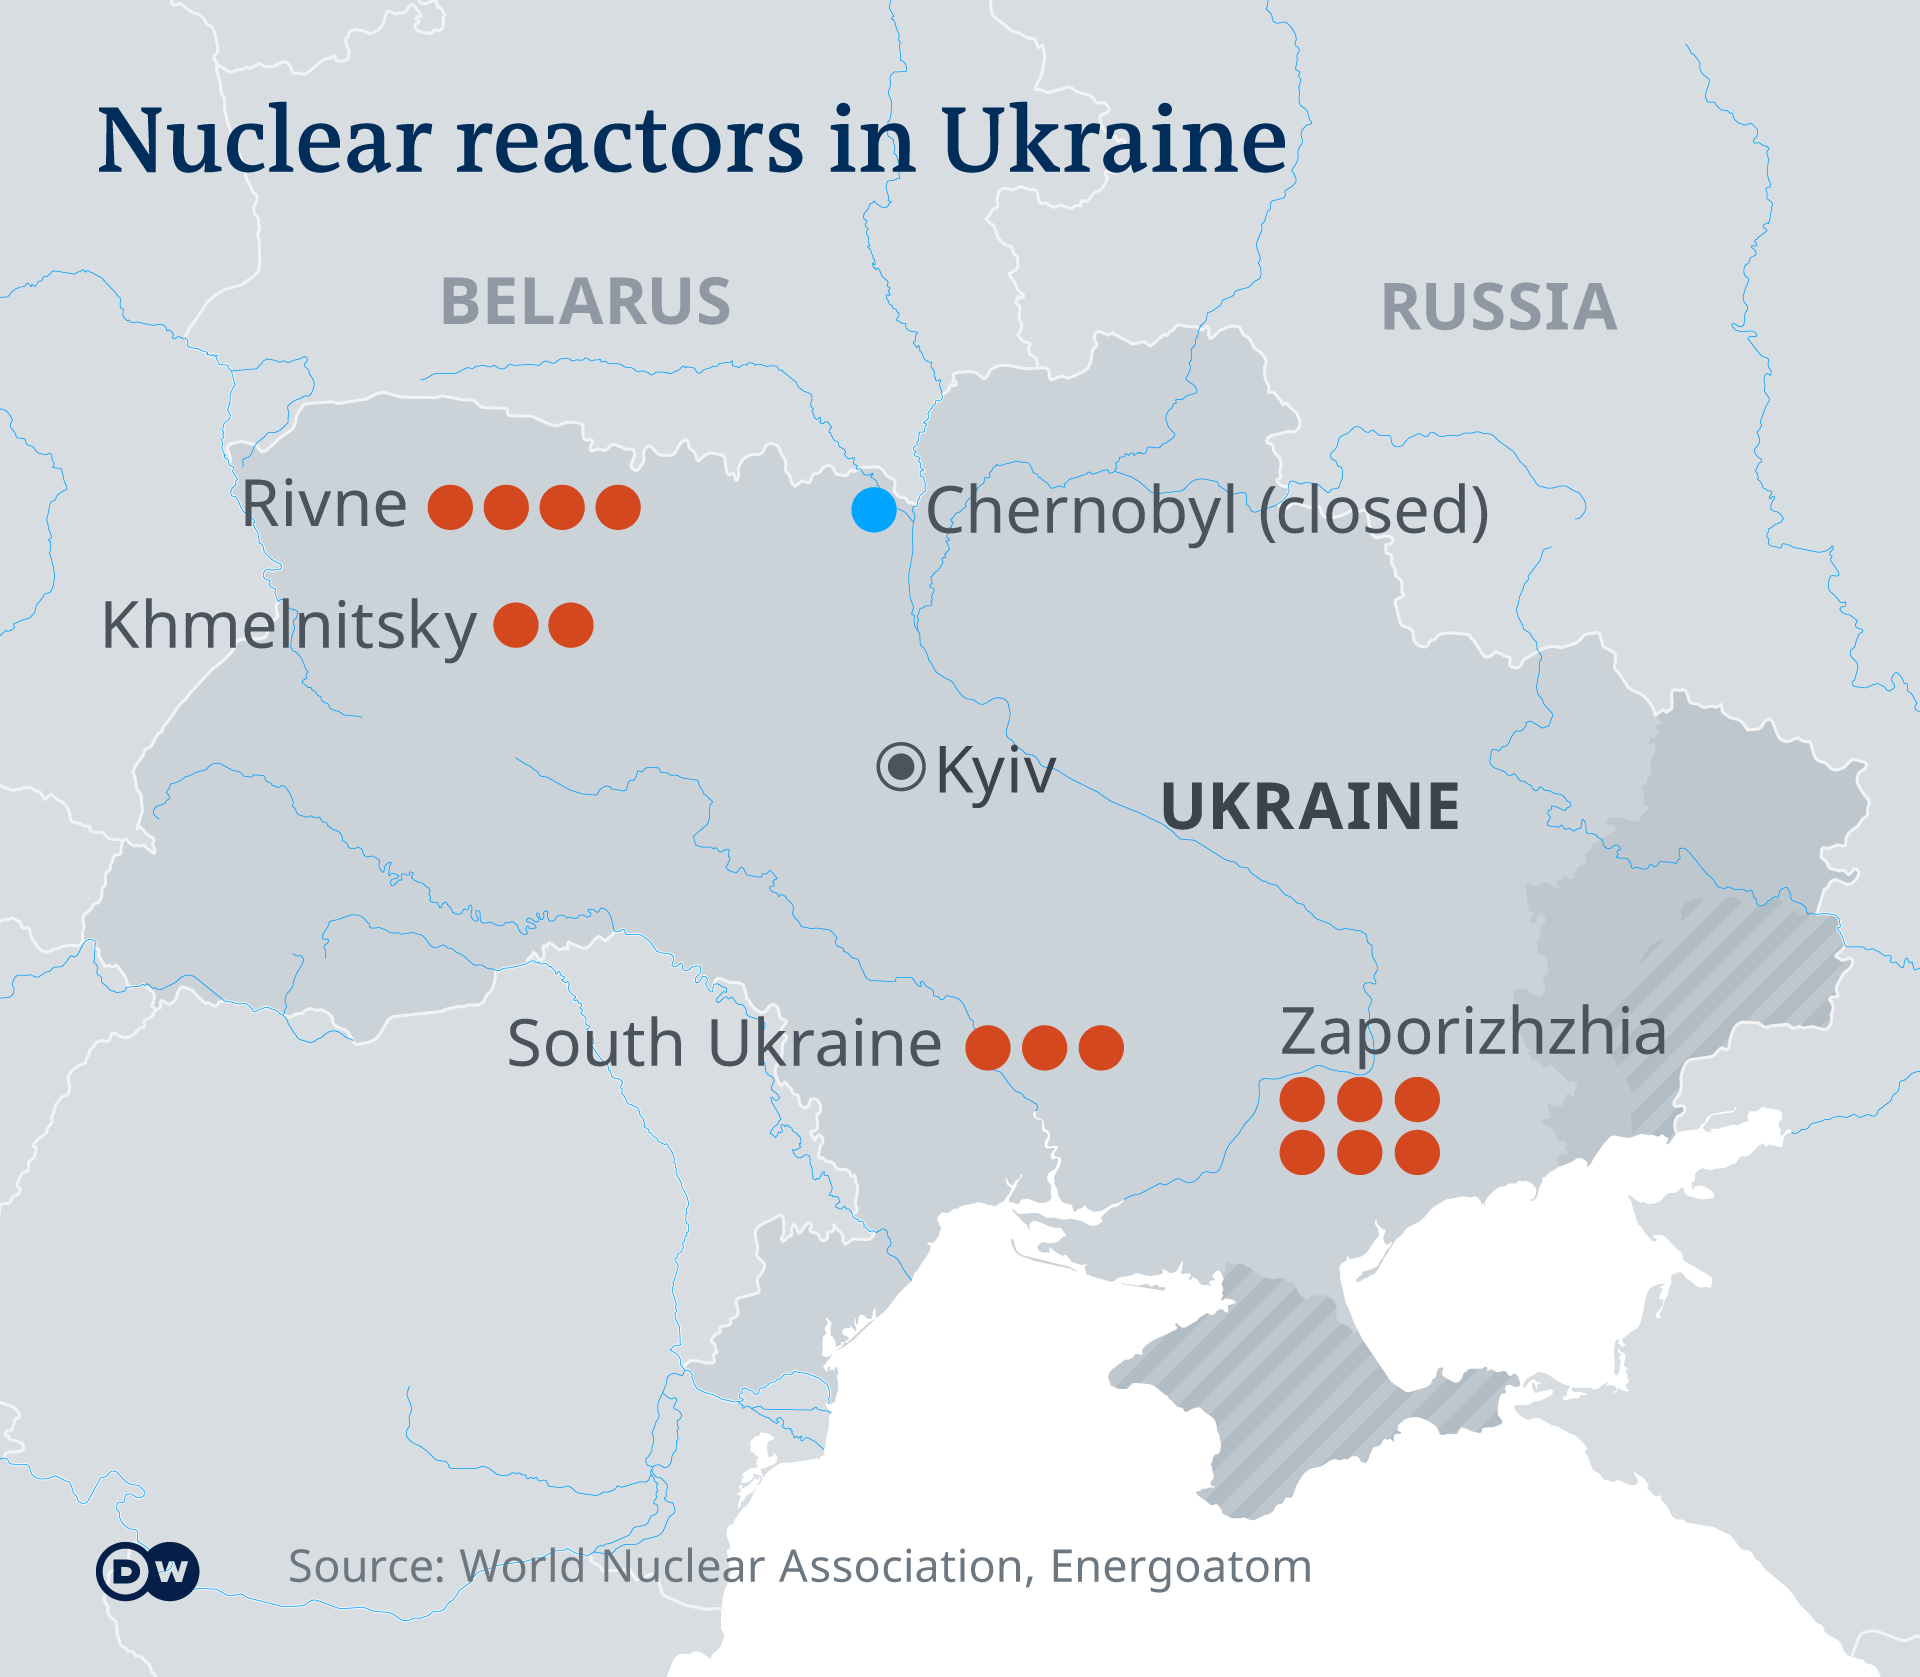 Map: nuclear reactors in Ukraine, including Zaporizhzhia and the closed Chernobyl